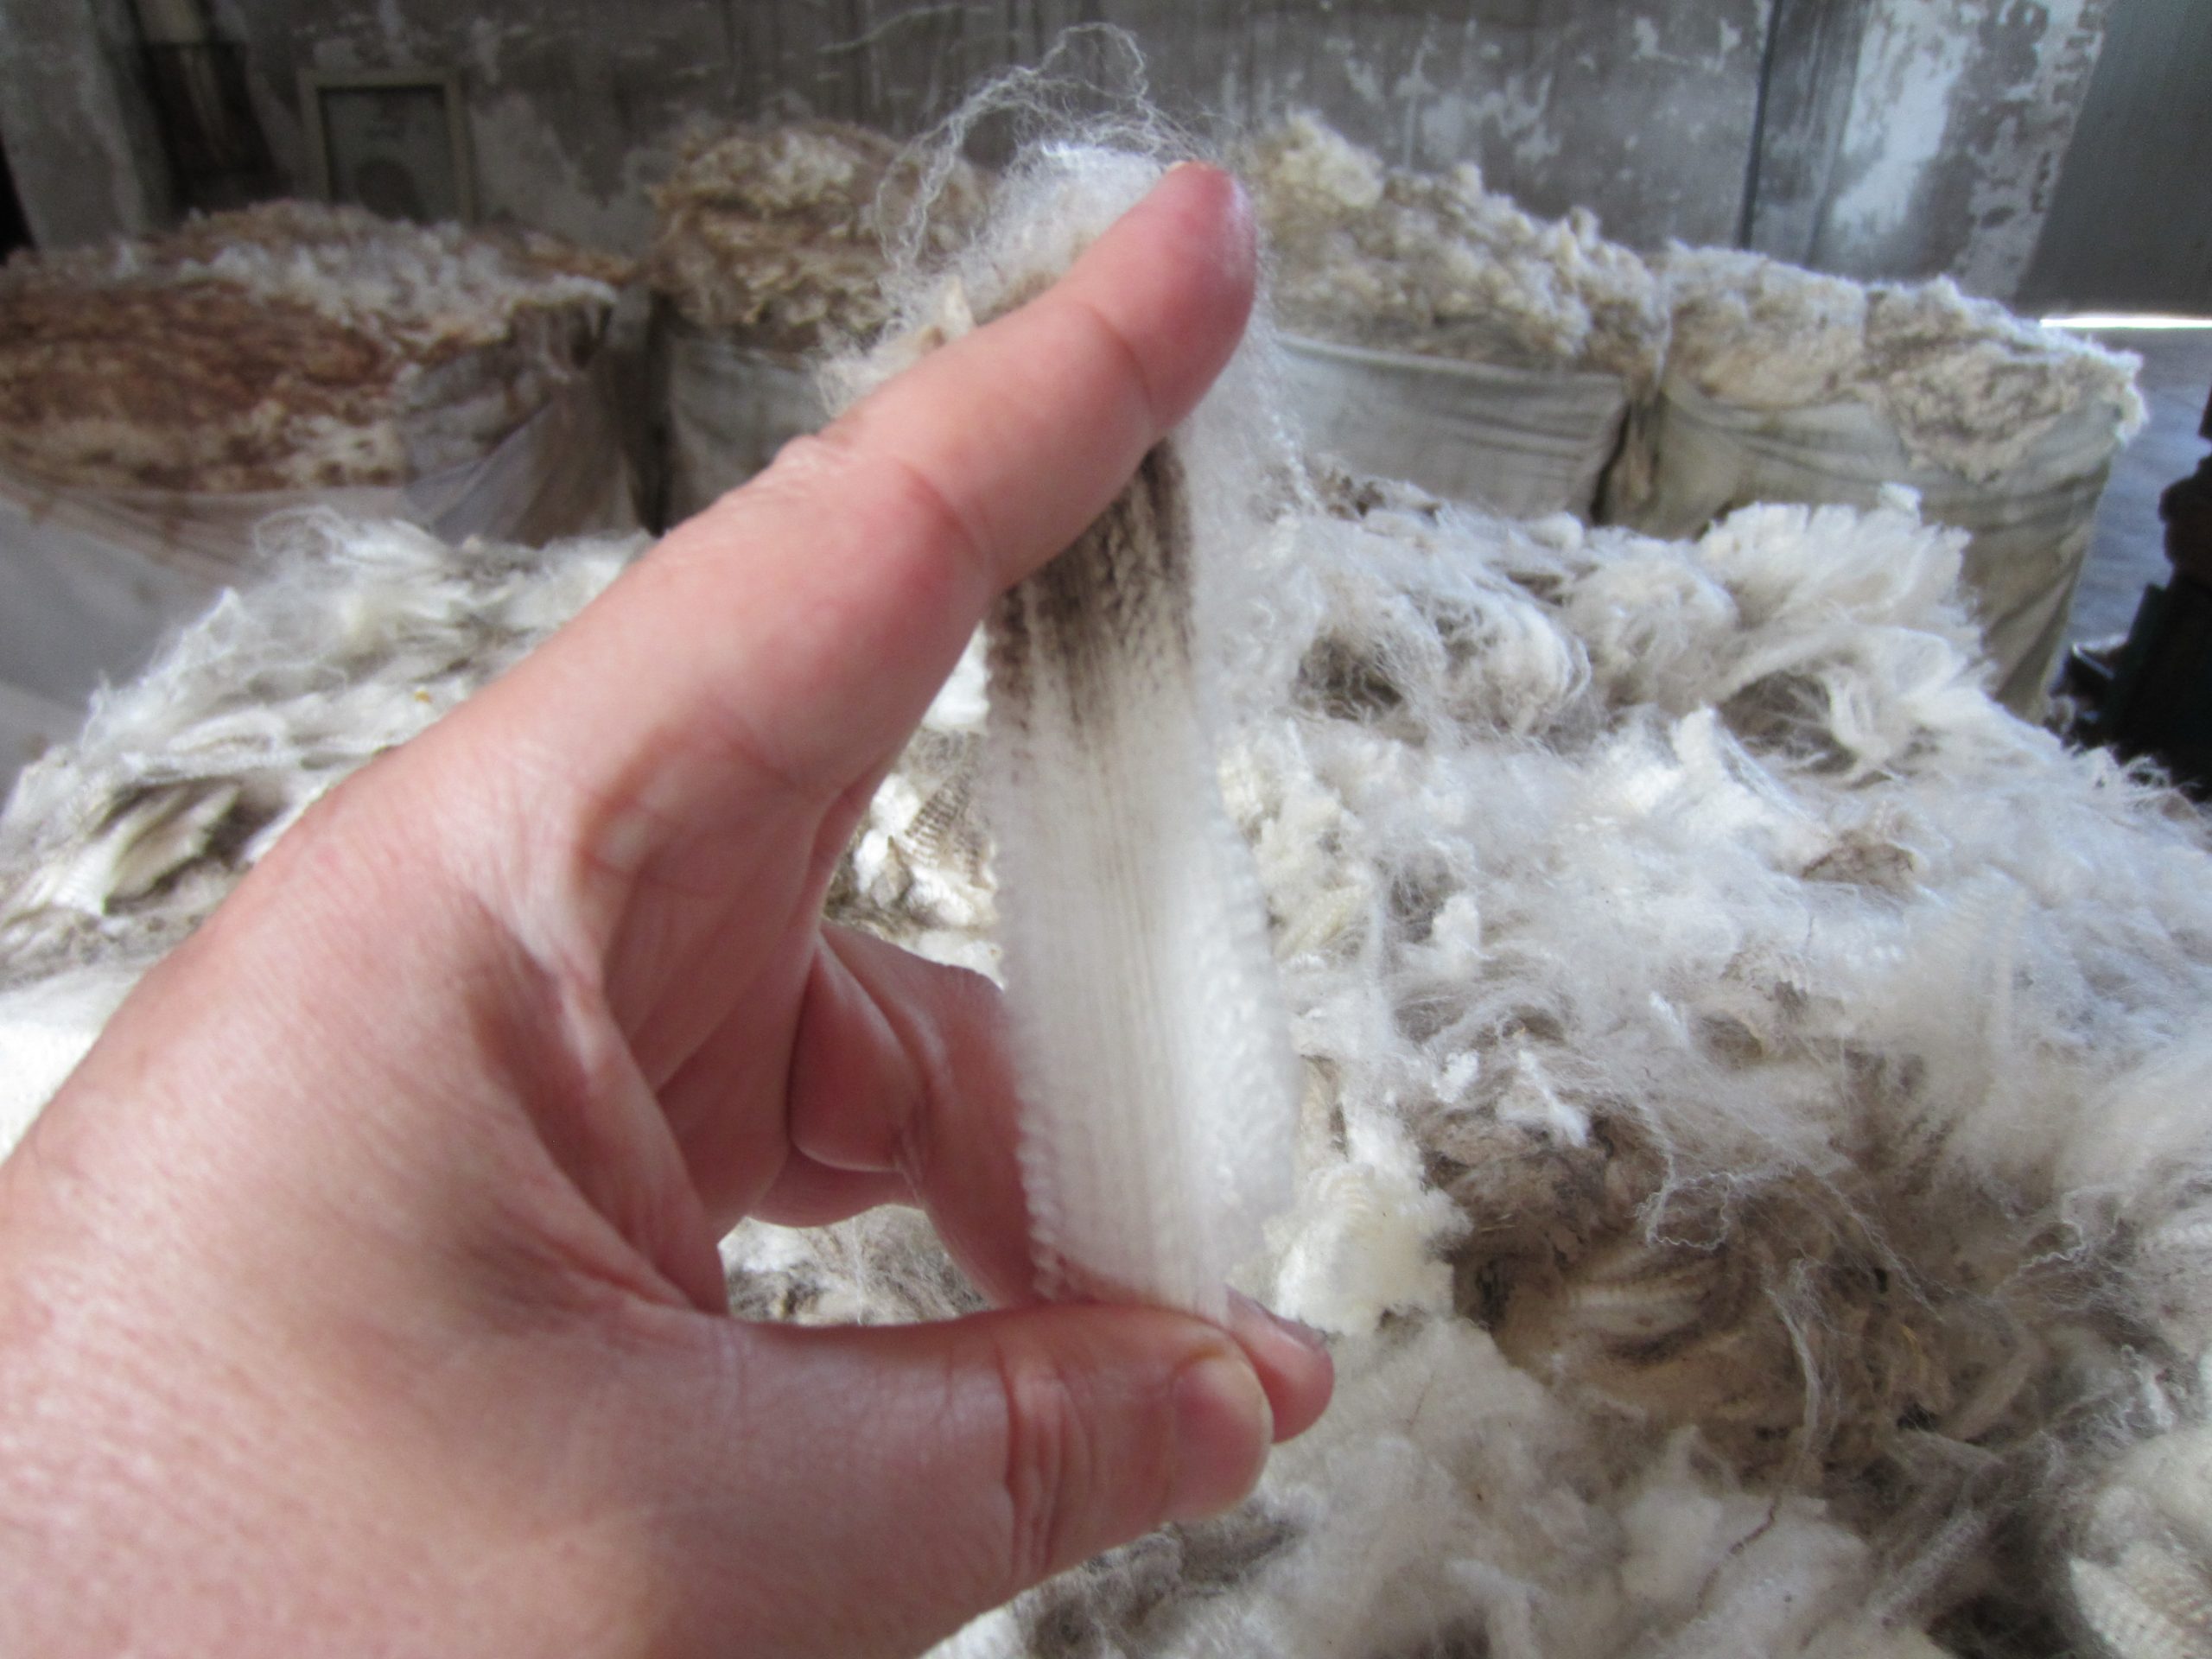 Australian Wool to receive more consumer support next year